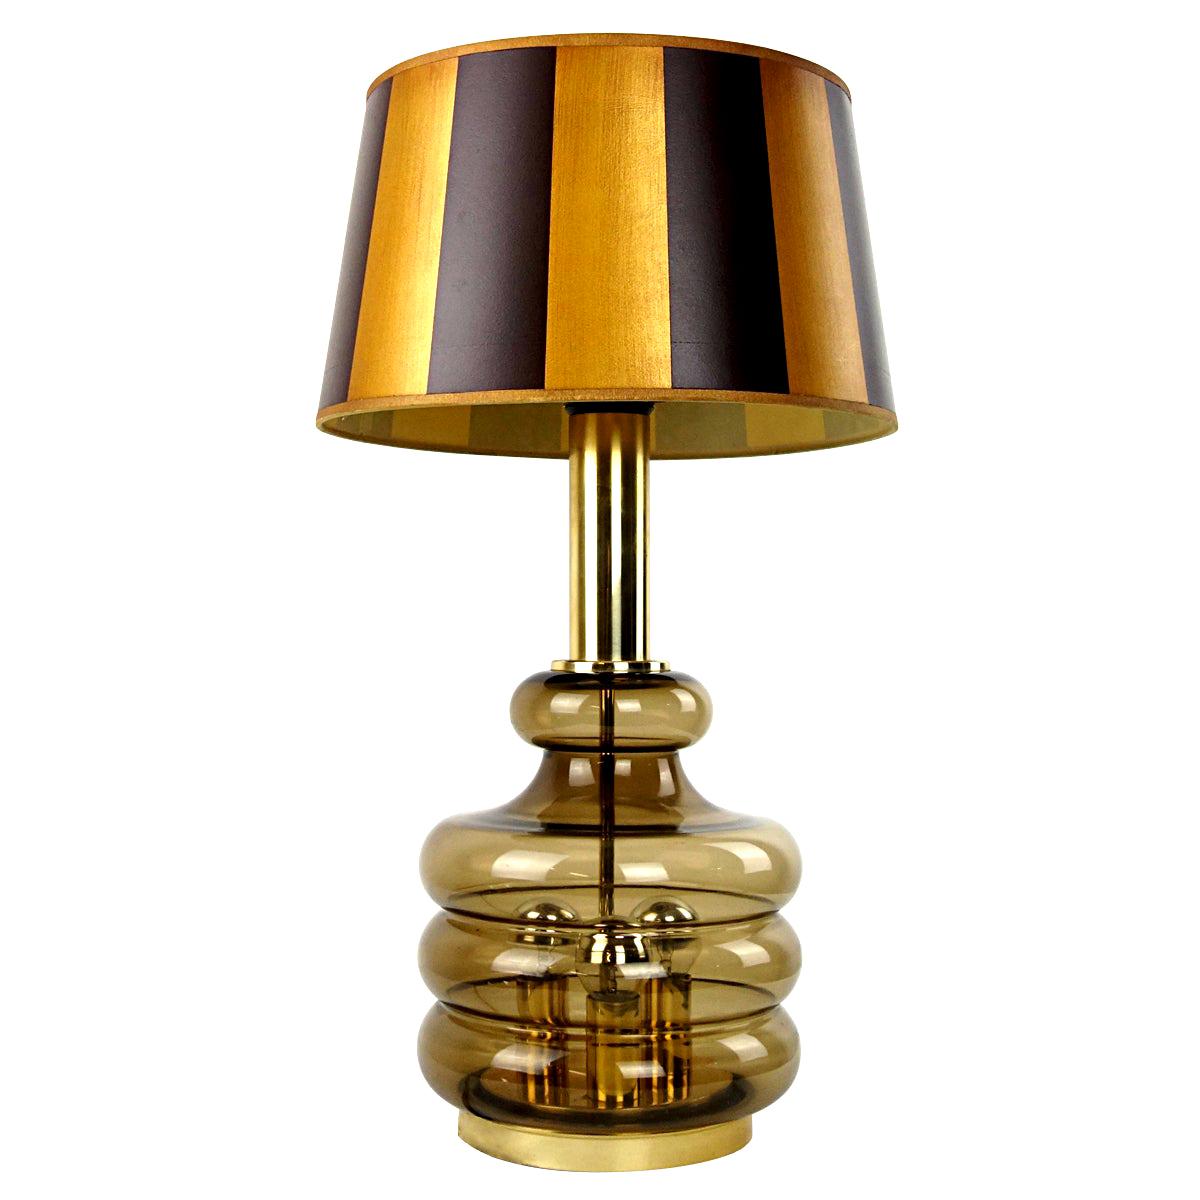 Mid-Century Modern Table Lamp Made of Smoked Glass by Doria Leuchten For Sale